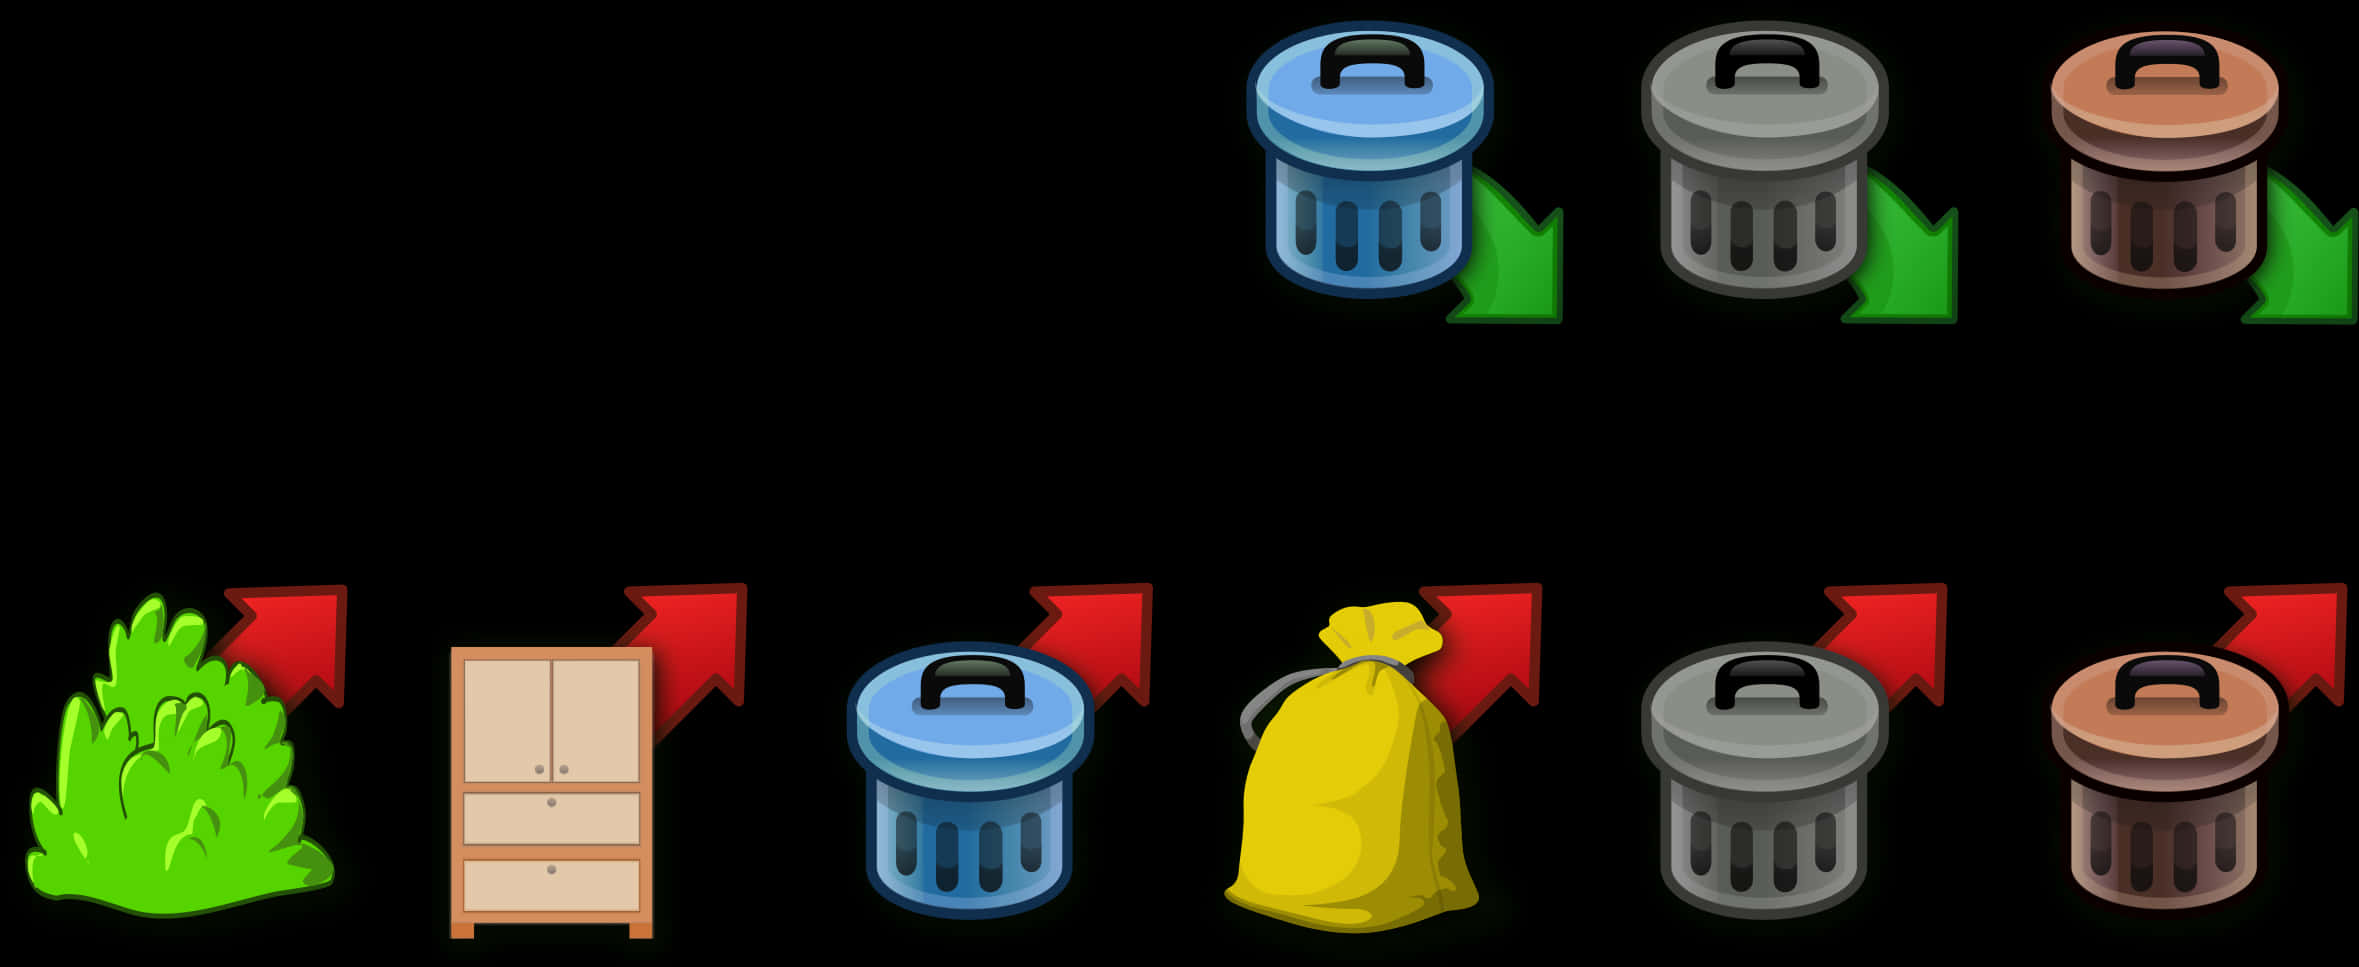 A Group Of Trash Cans